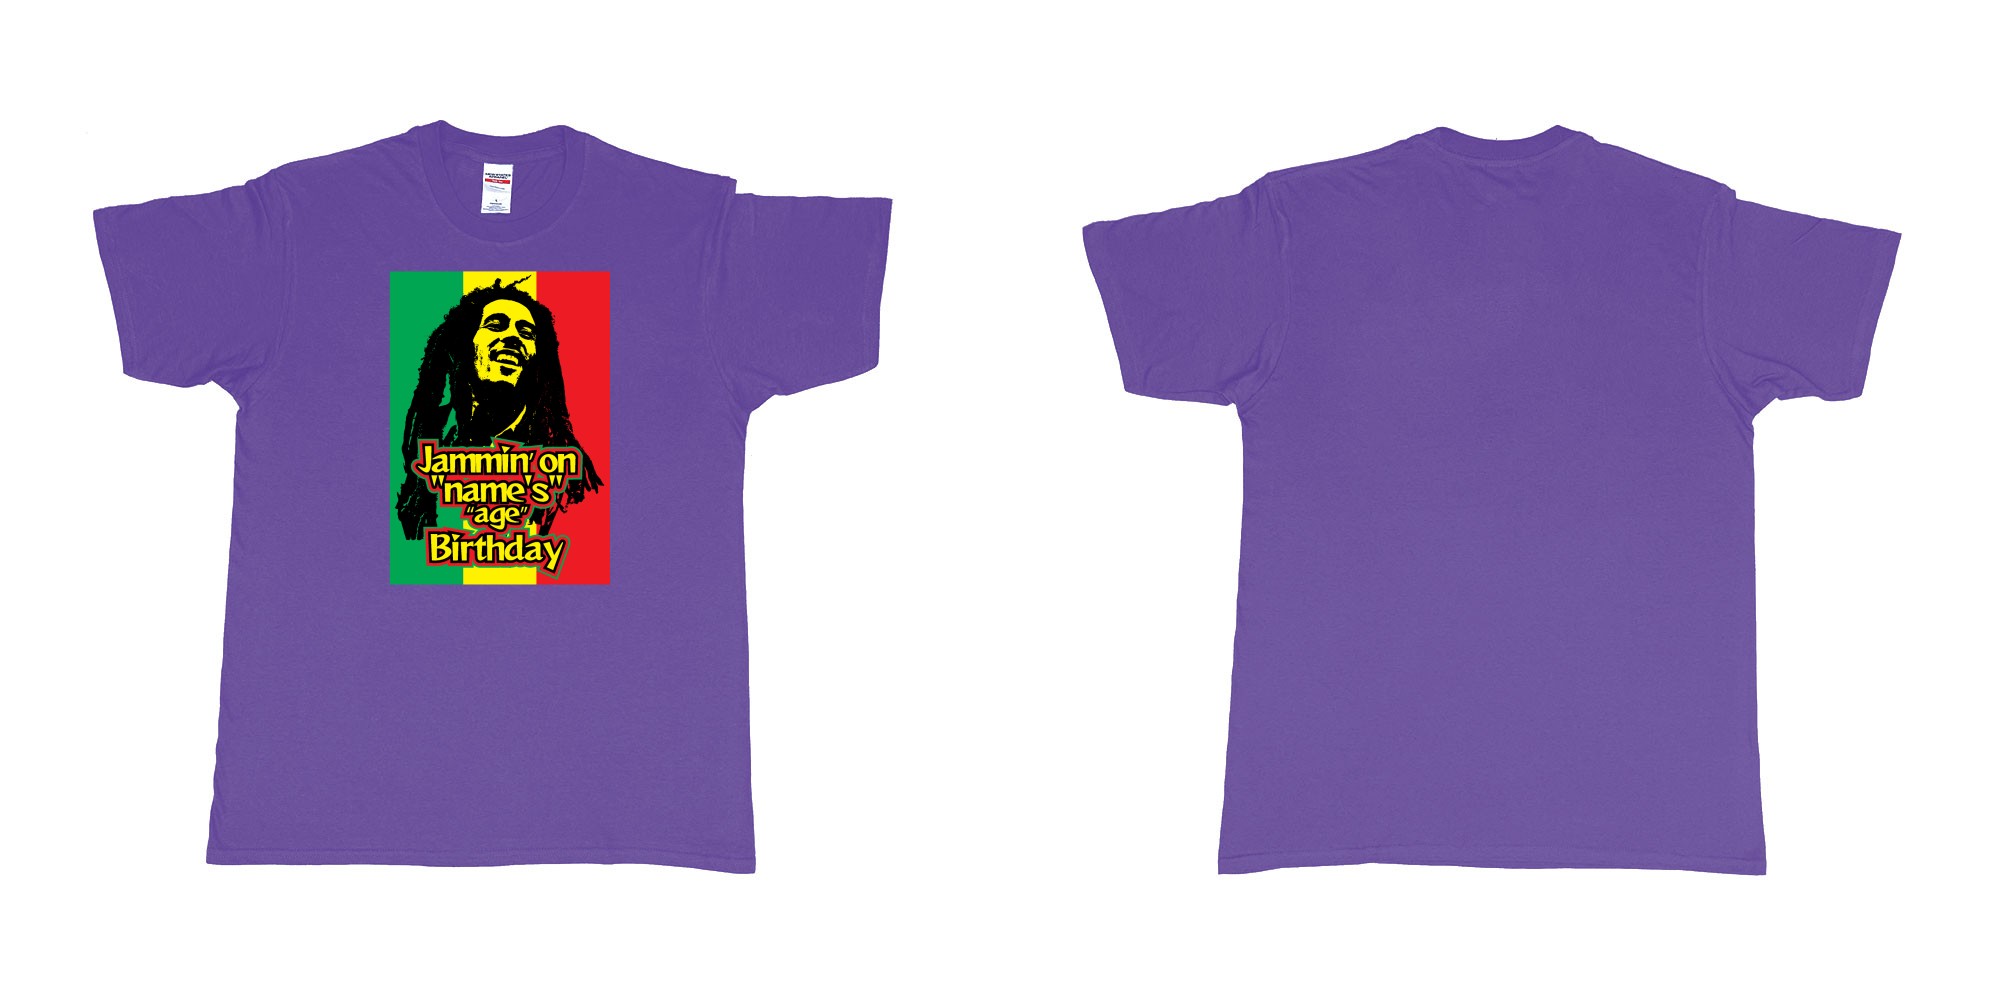 Custom tshirt design bob marley jammin on custom names birthday in fabric color purple choice your own text made in Bali by The Pirate Way